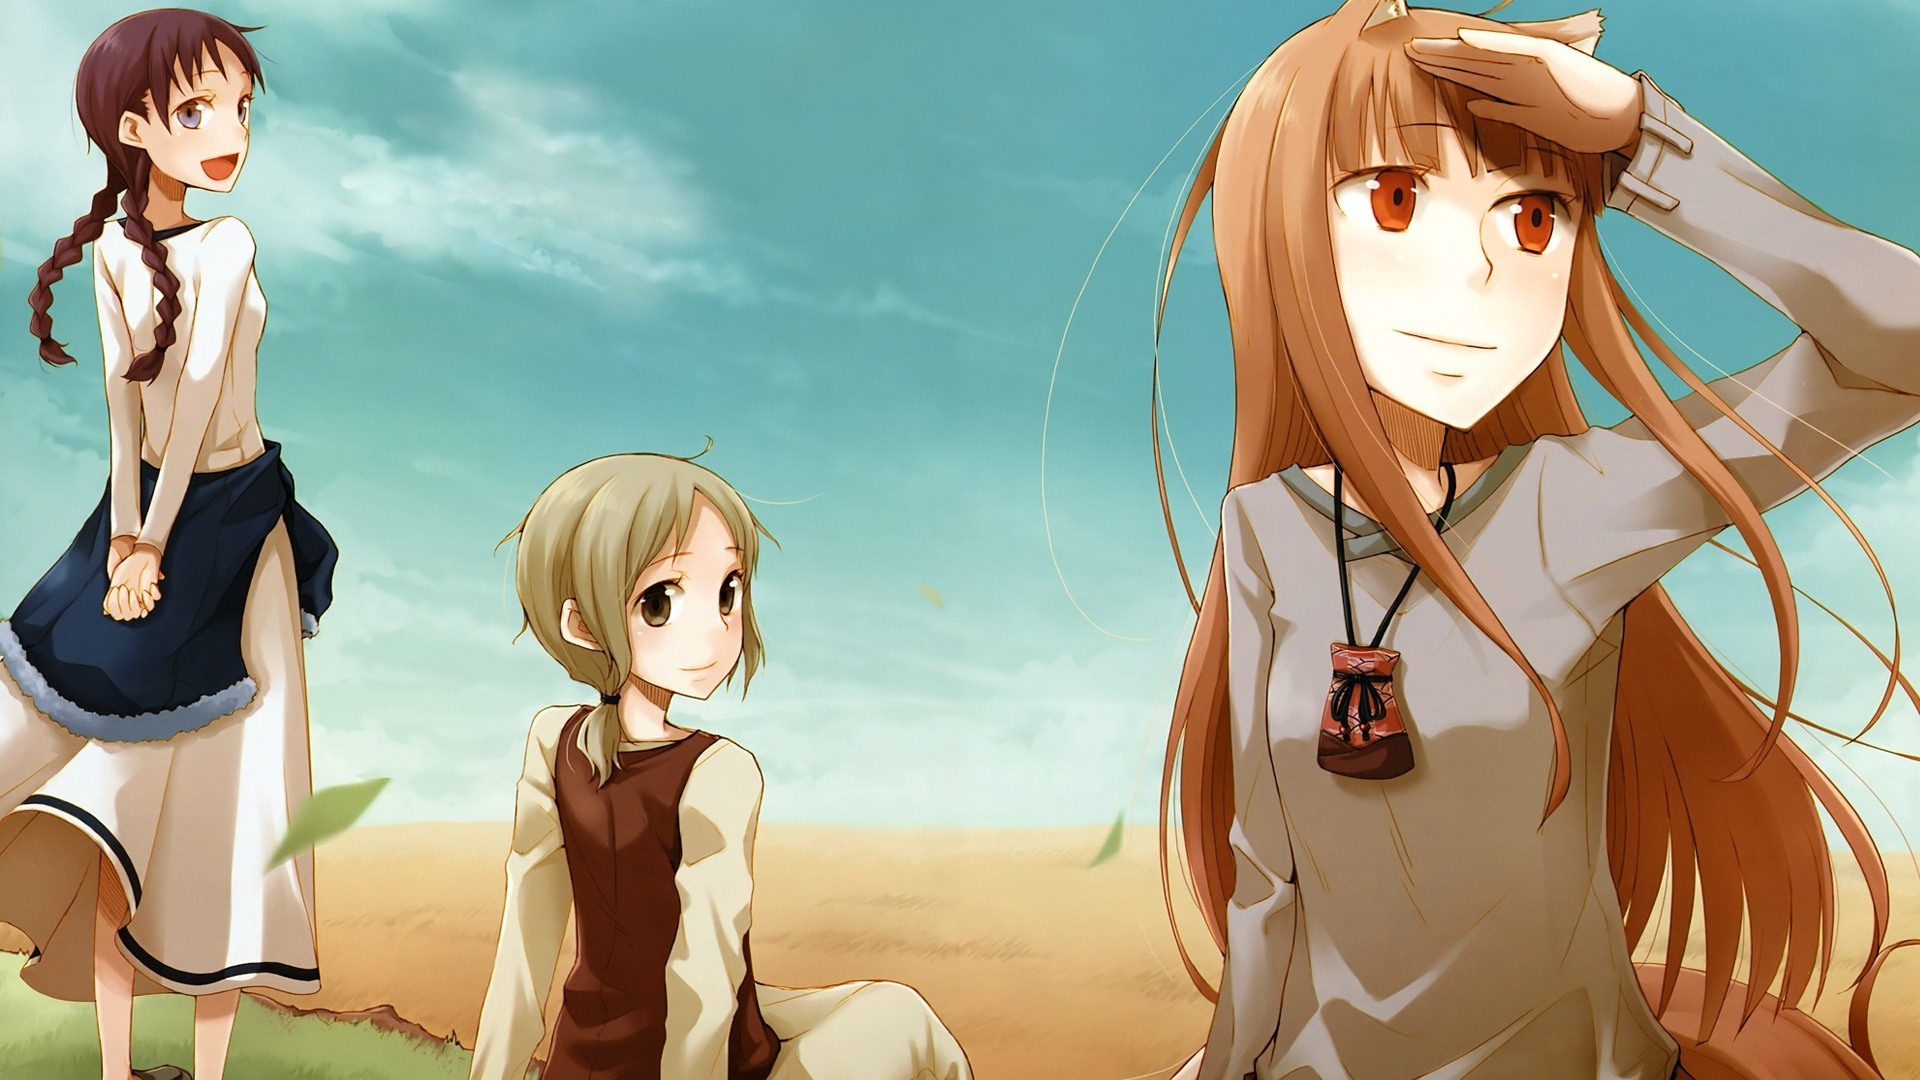 Spice and Wolf HD Wallpaper #5 - 1920x1080